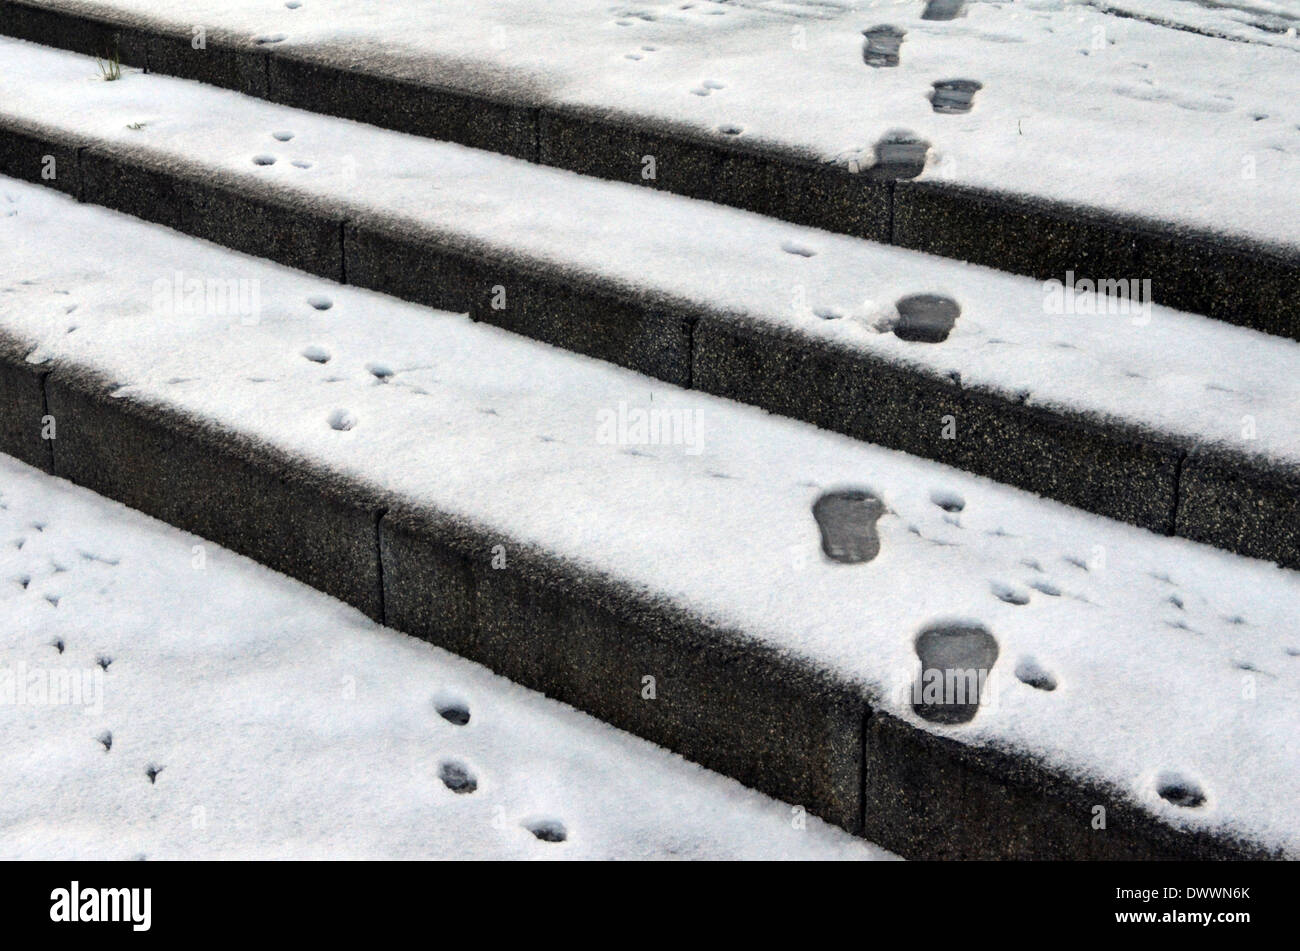 Footprints in the snow, human, dog and bird. Stock Photo